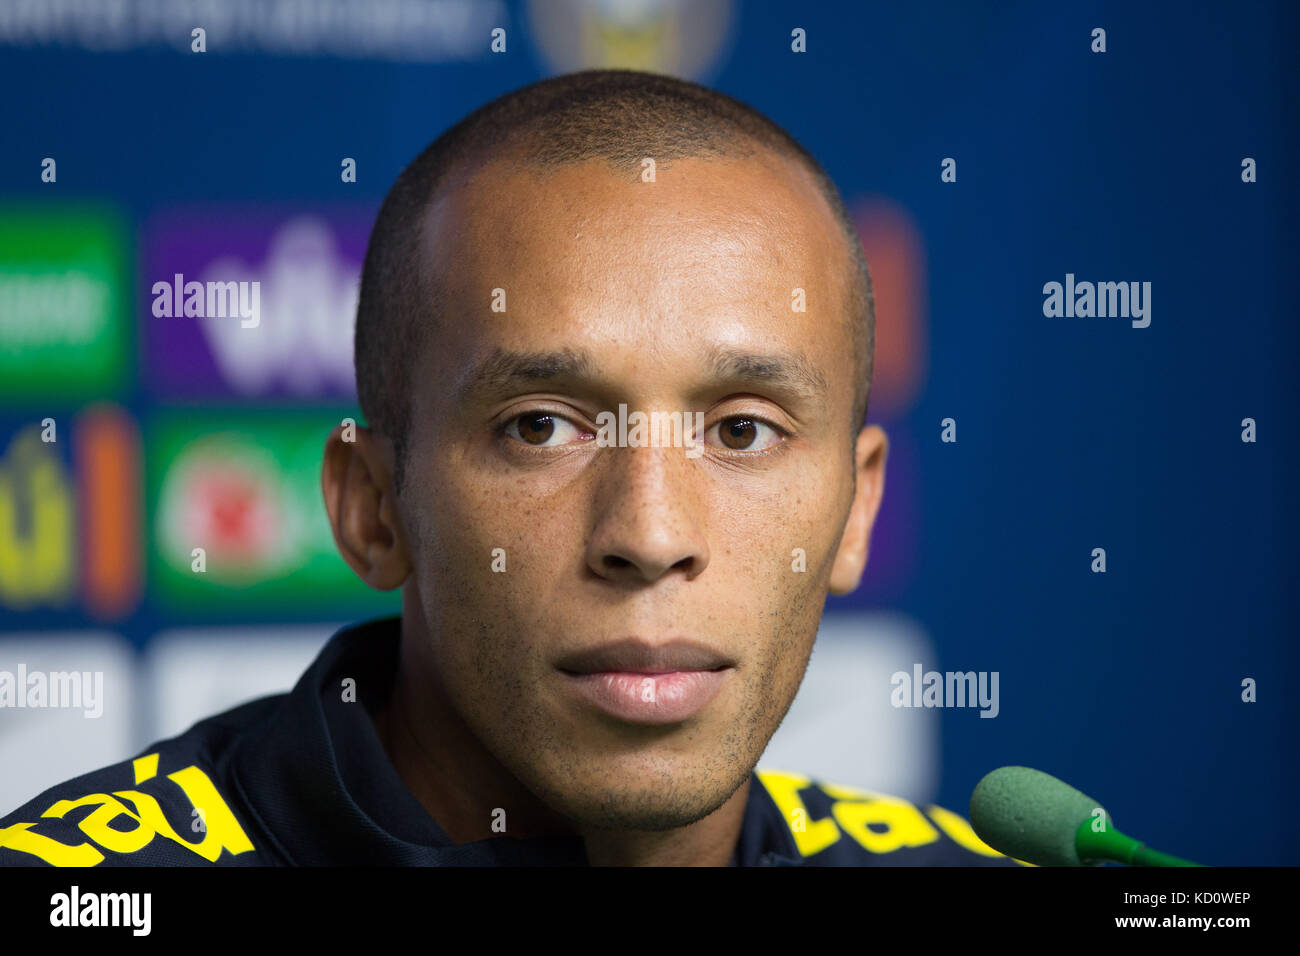 Sao Paulo, Sao Paulo, Brazil. 8th Oct, 2017. Brazil's soccer player MIRANDA attends a press conference after the training session of the Brazil's national soccer team in Sao Paulo, Brazil, before the match against Chile, for the qualifiers of the upcoming Russia 2018 World Cup. Credit: Paulo Lopes/ZUMA Wire/Alamy Live News Stock Photo